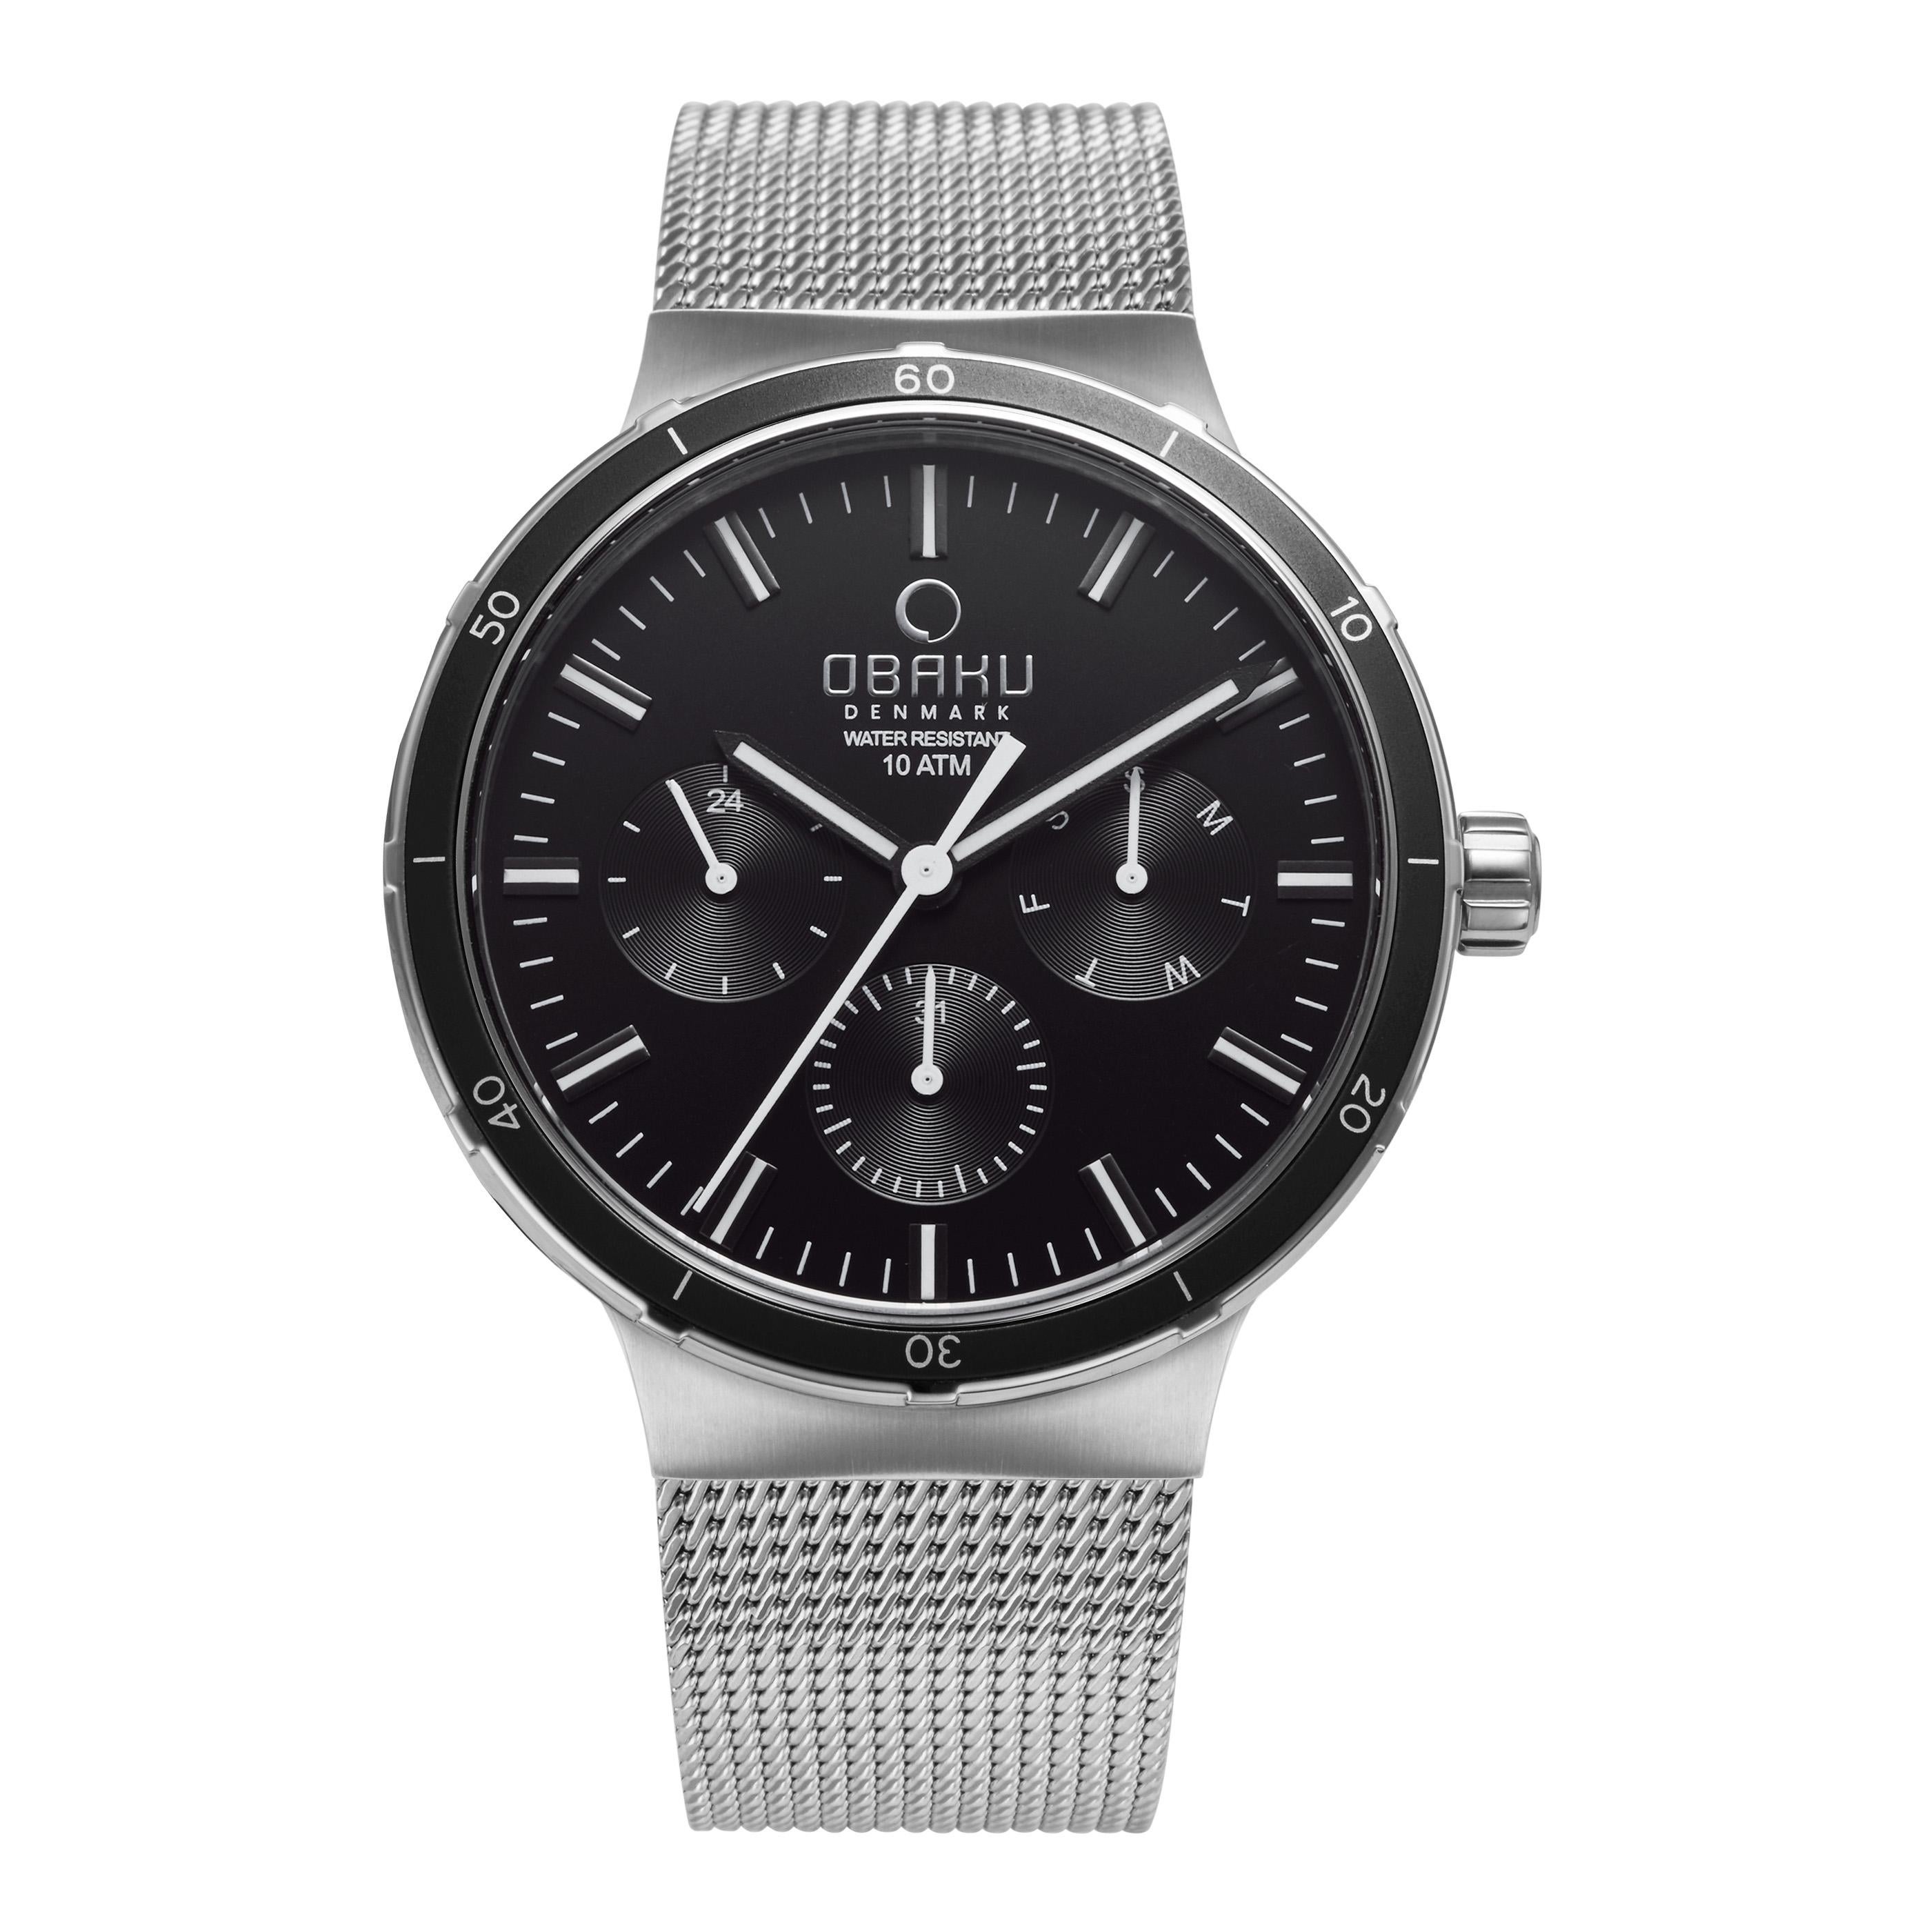 This watch includes a two-year warranty. 

Case: Steel
Dial: Black
Strap: Stainless Steel Mesh Bracelet
Water Resistant: 10 ATM
Size: 43.0 x 49.3 mm
Design by: Christian Mikkelsen
Item Code: V220GMCBMC
Movement: Multi-function